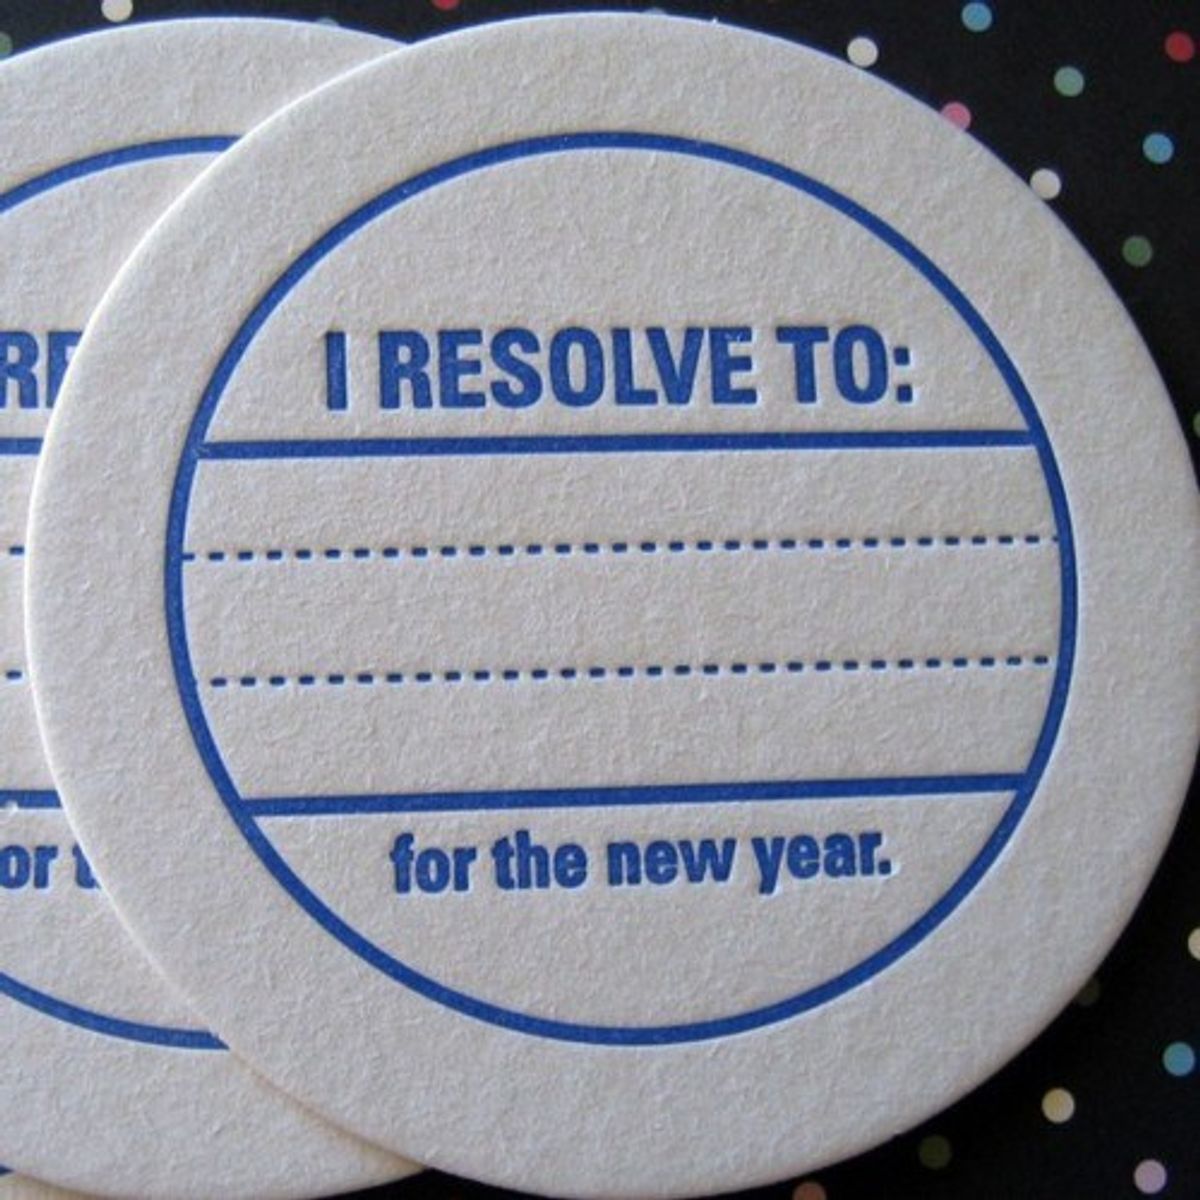 ​13 New Year’s Resolutions That Are Not “Lose weight”